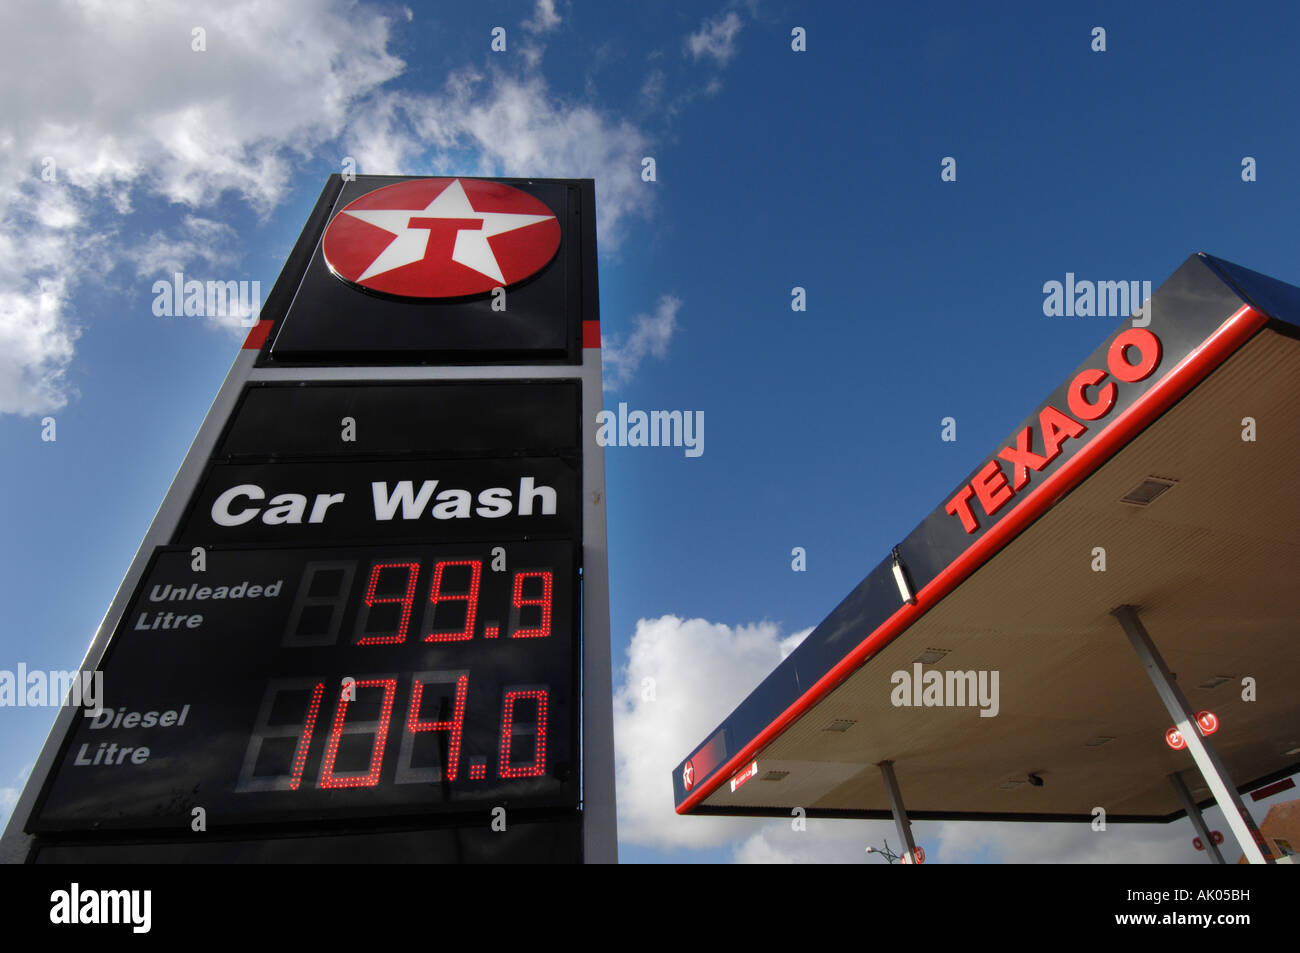 Fuel prices displayed on petrol pumps at 99.8p petrol and 89p diesel at a Texaco garage Stock Photo